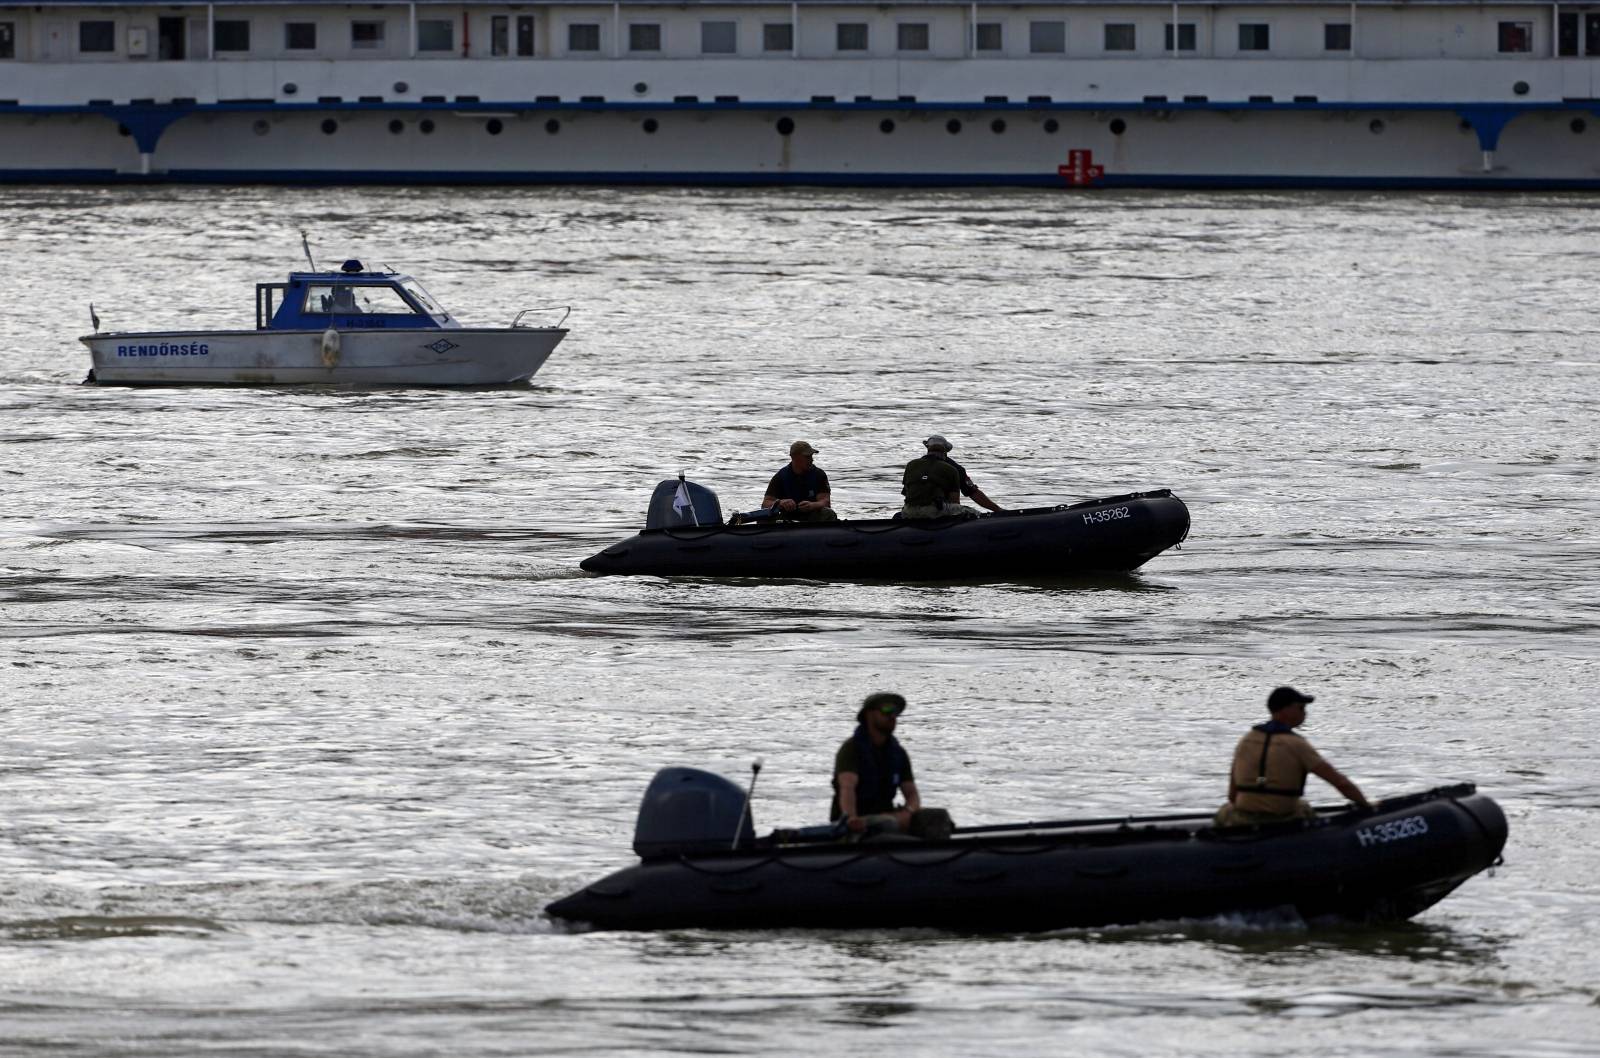 Rescue team continues its search after a tourist boat accident in the Danube river in Budapest